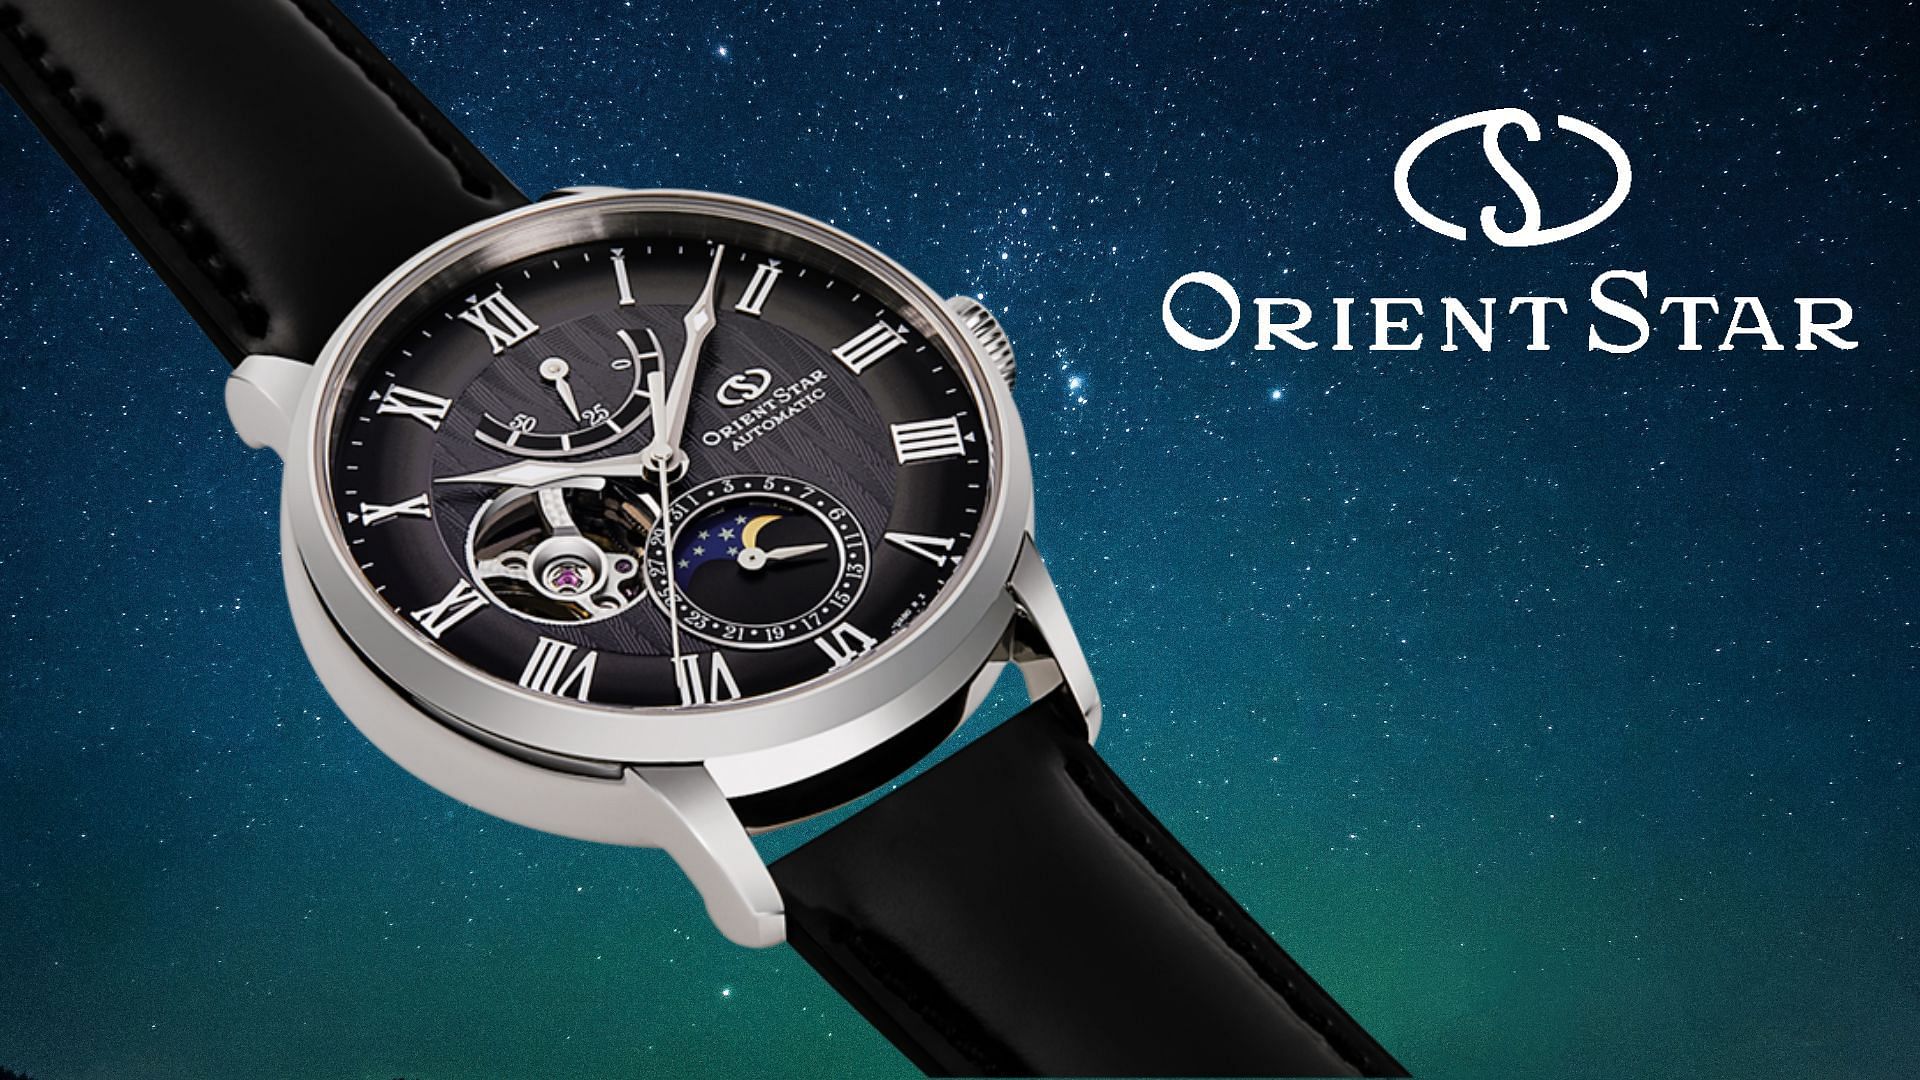 Orient Star Mechanical Moon Phase M45 F7 watch (Image via Orient Star)